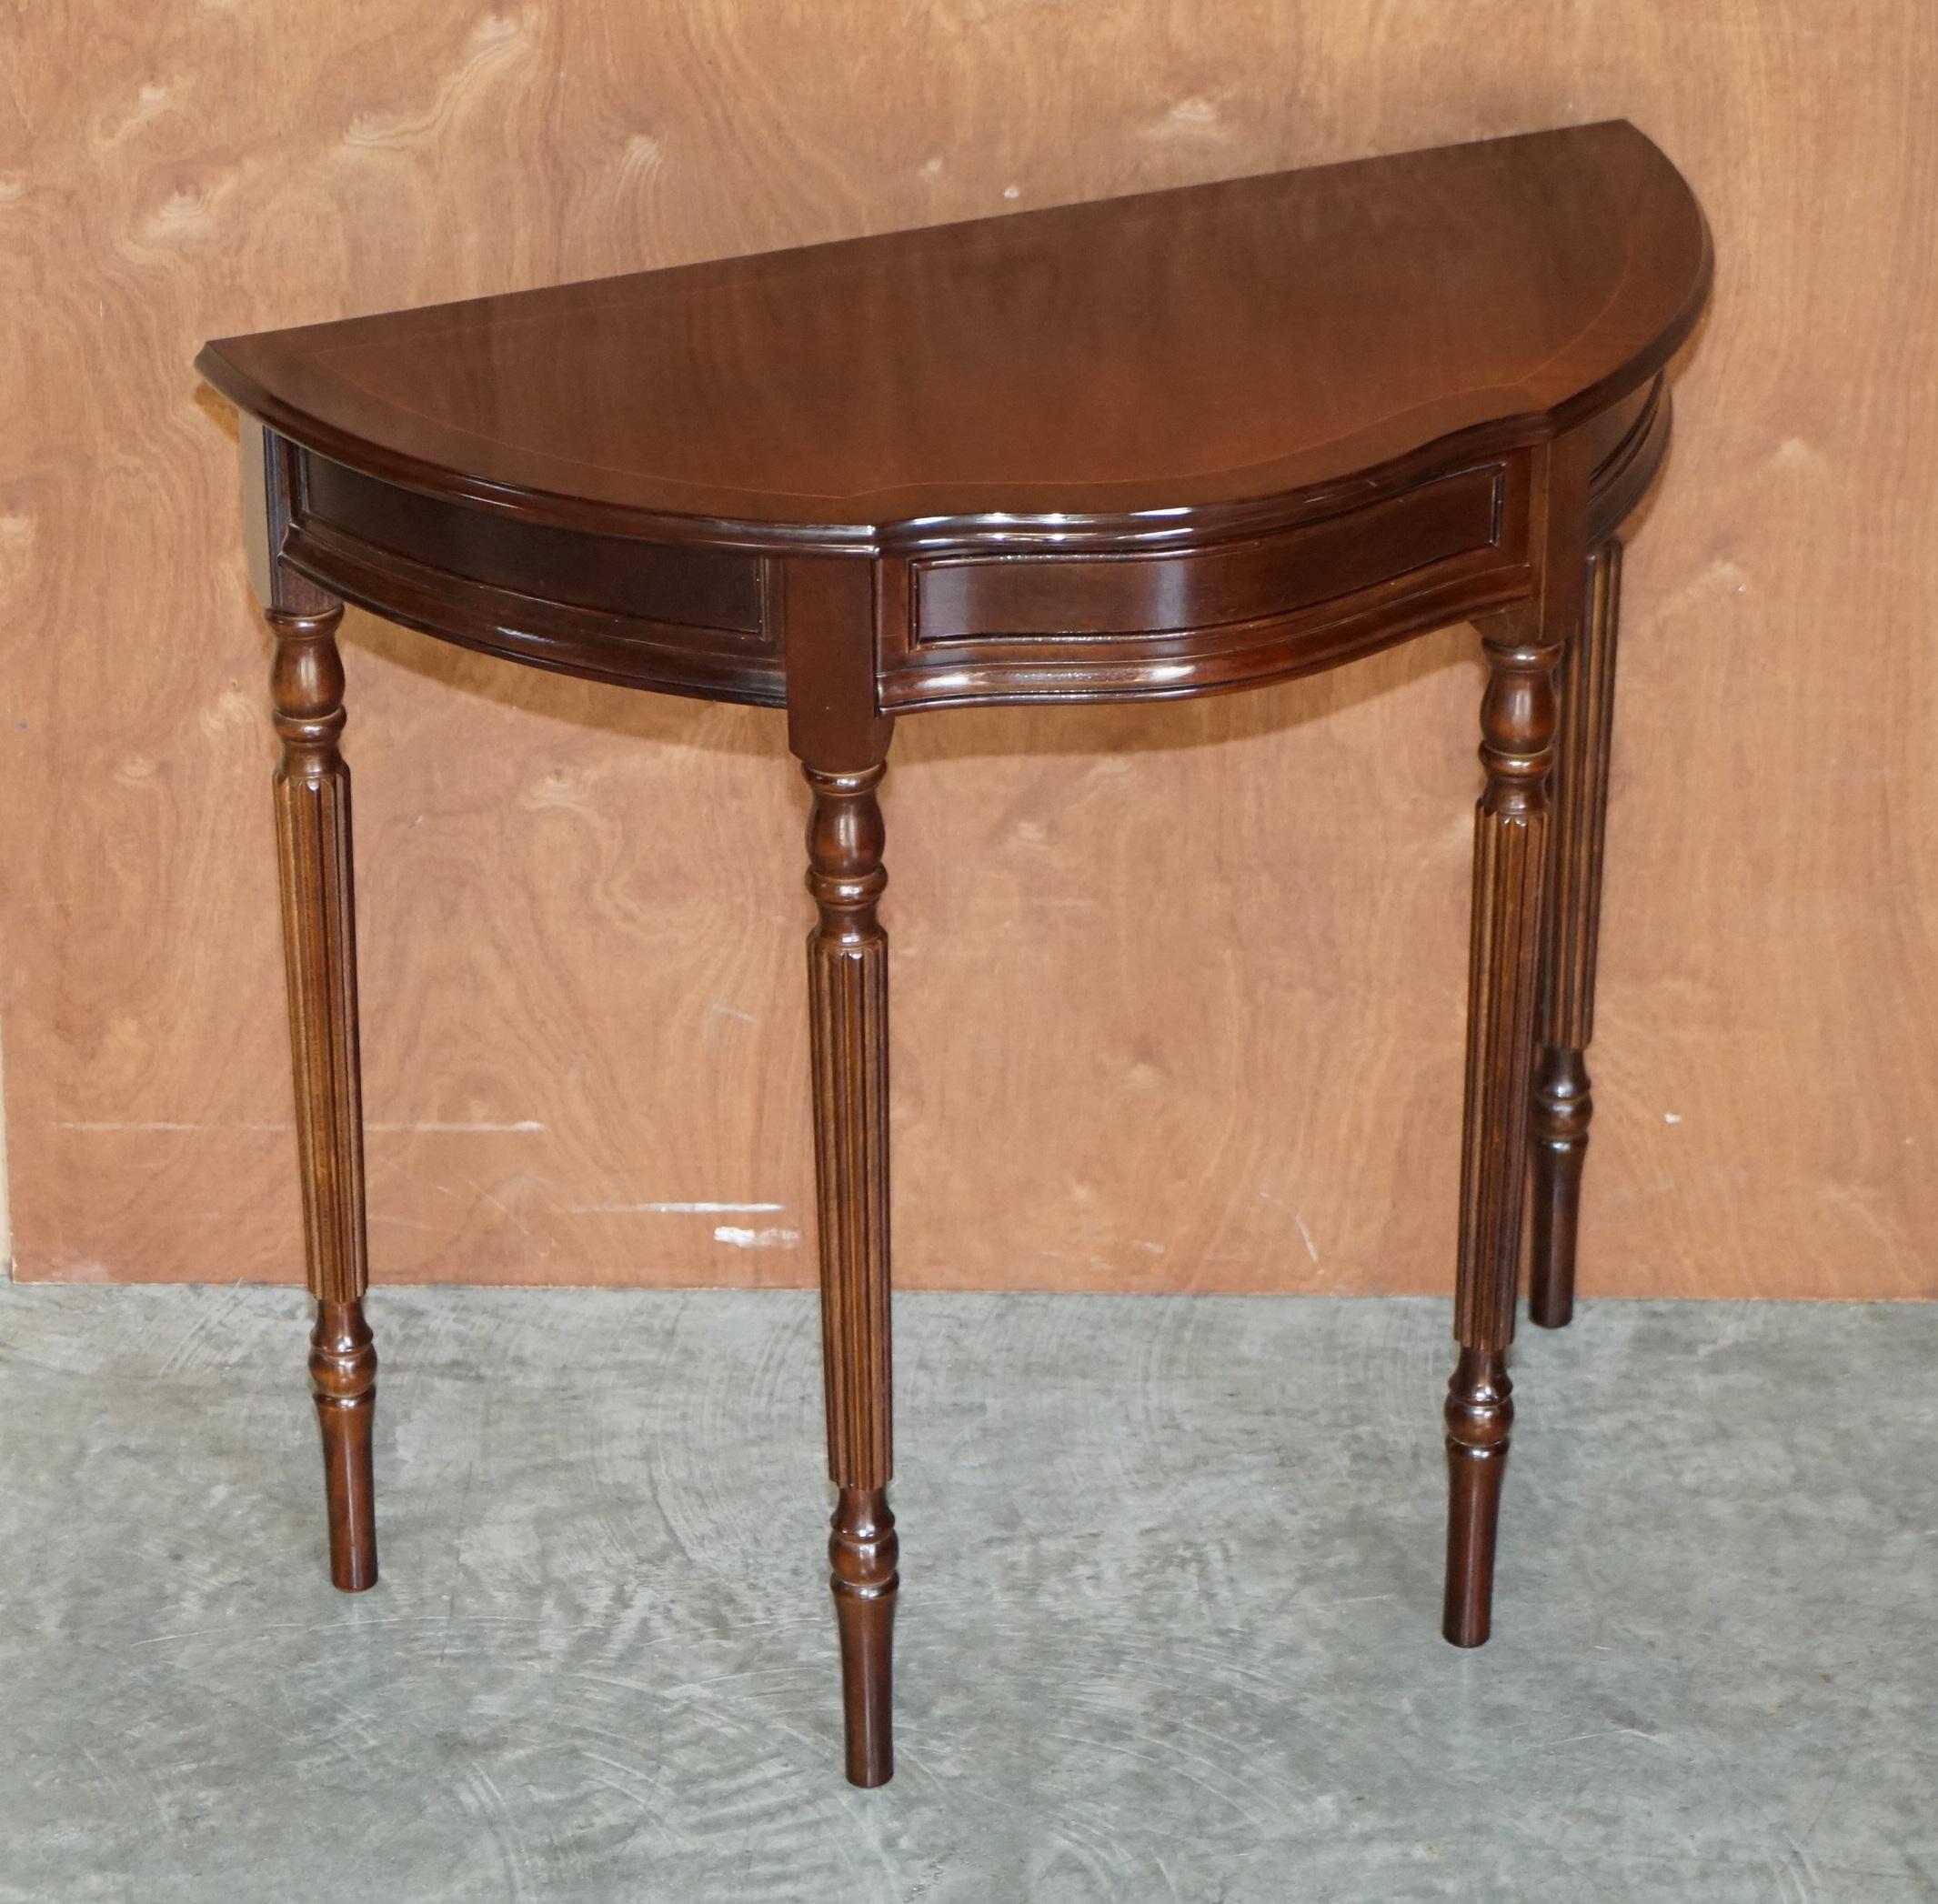 We are delighted to offer for sale this stunning vintage flamed mahogany demi lune console tables with single drawer

A good looking well made and decorative table, it has one good sized middle drawer with tapered legs

The table has been